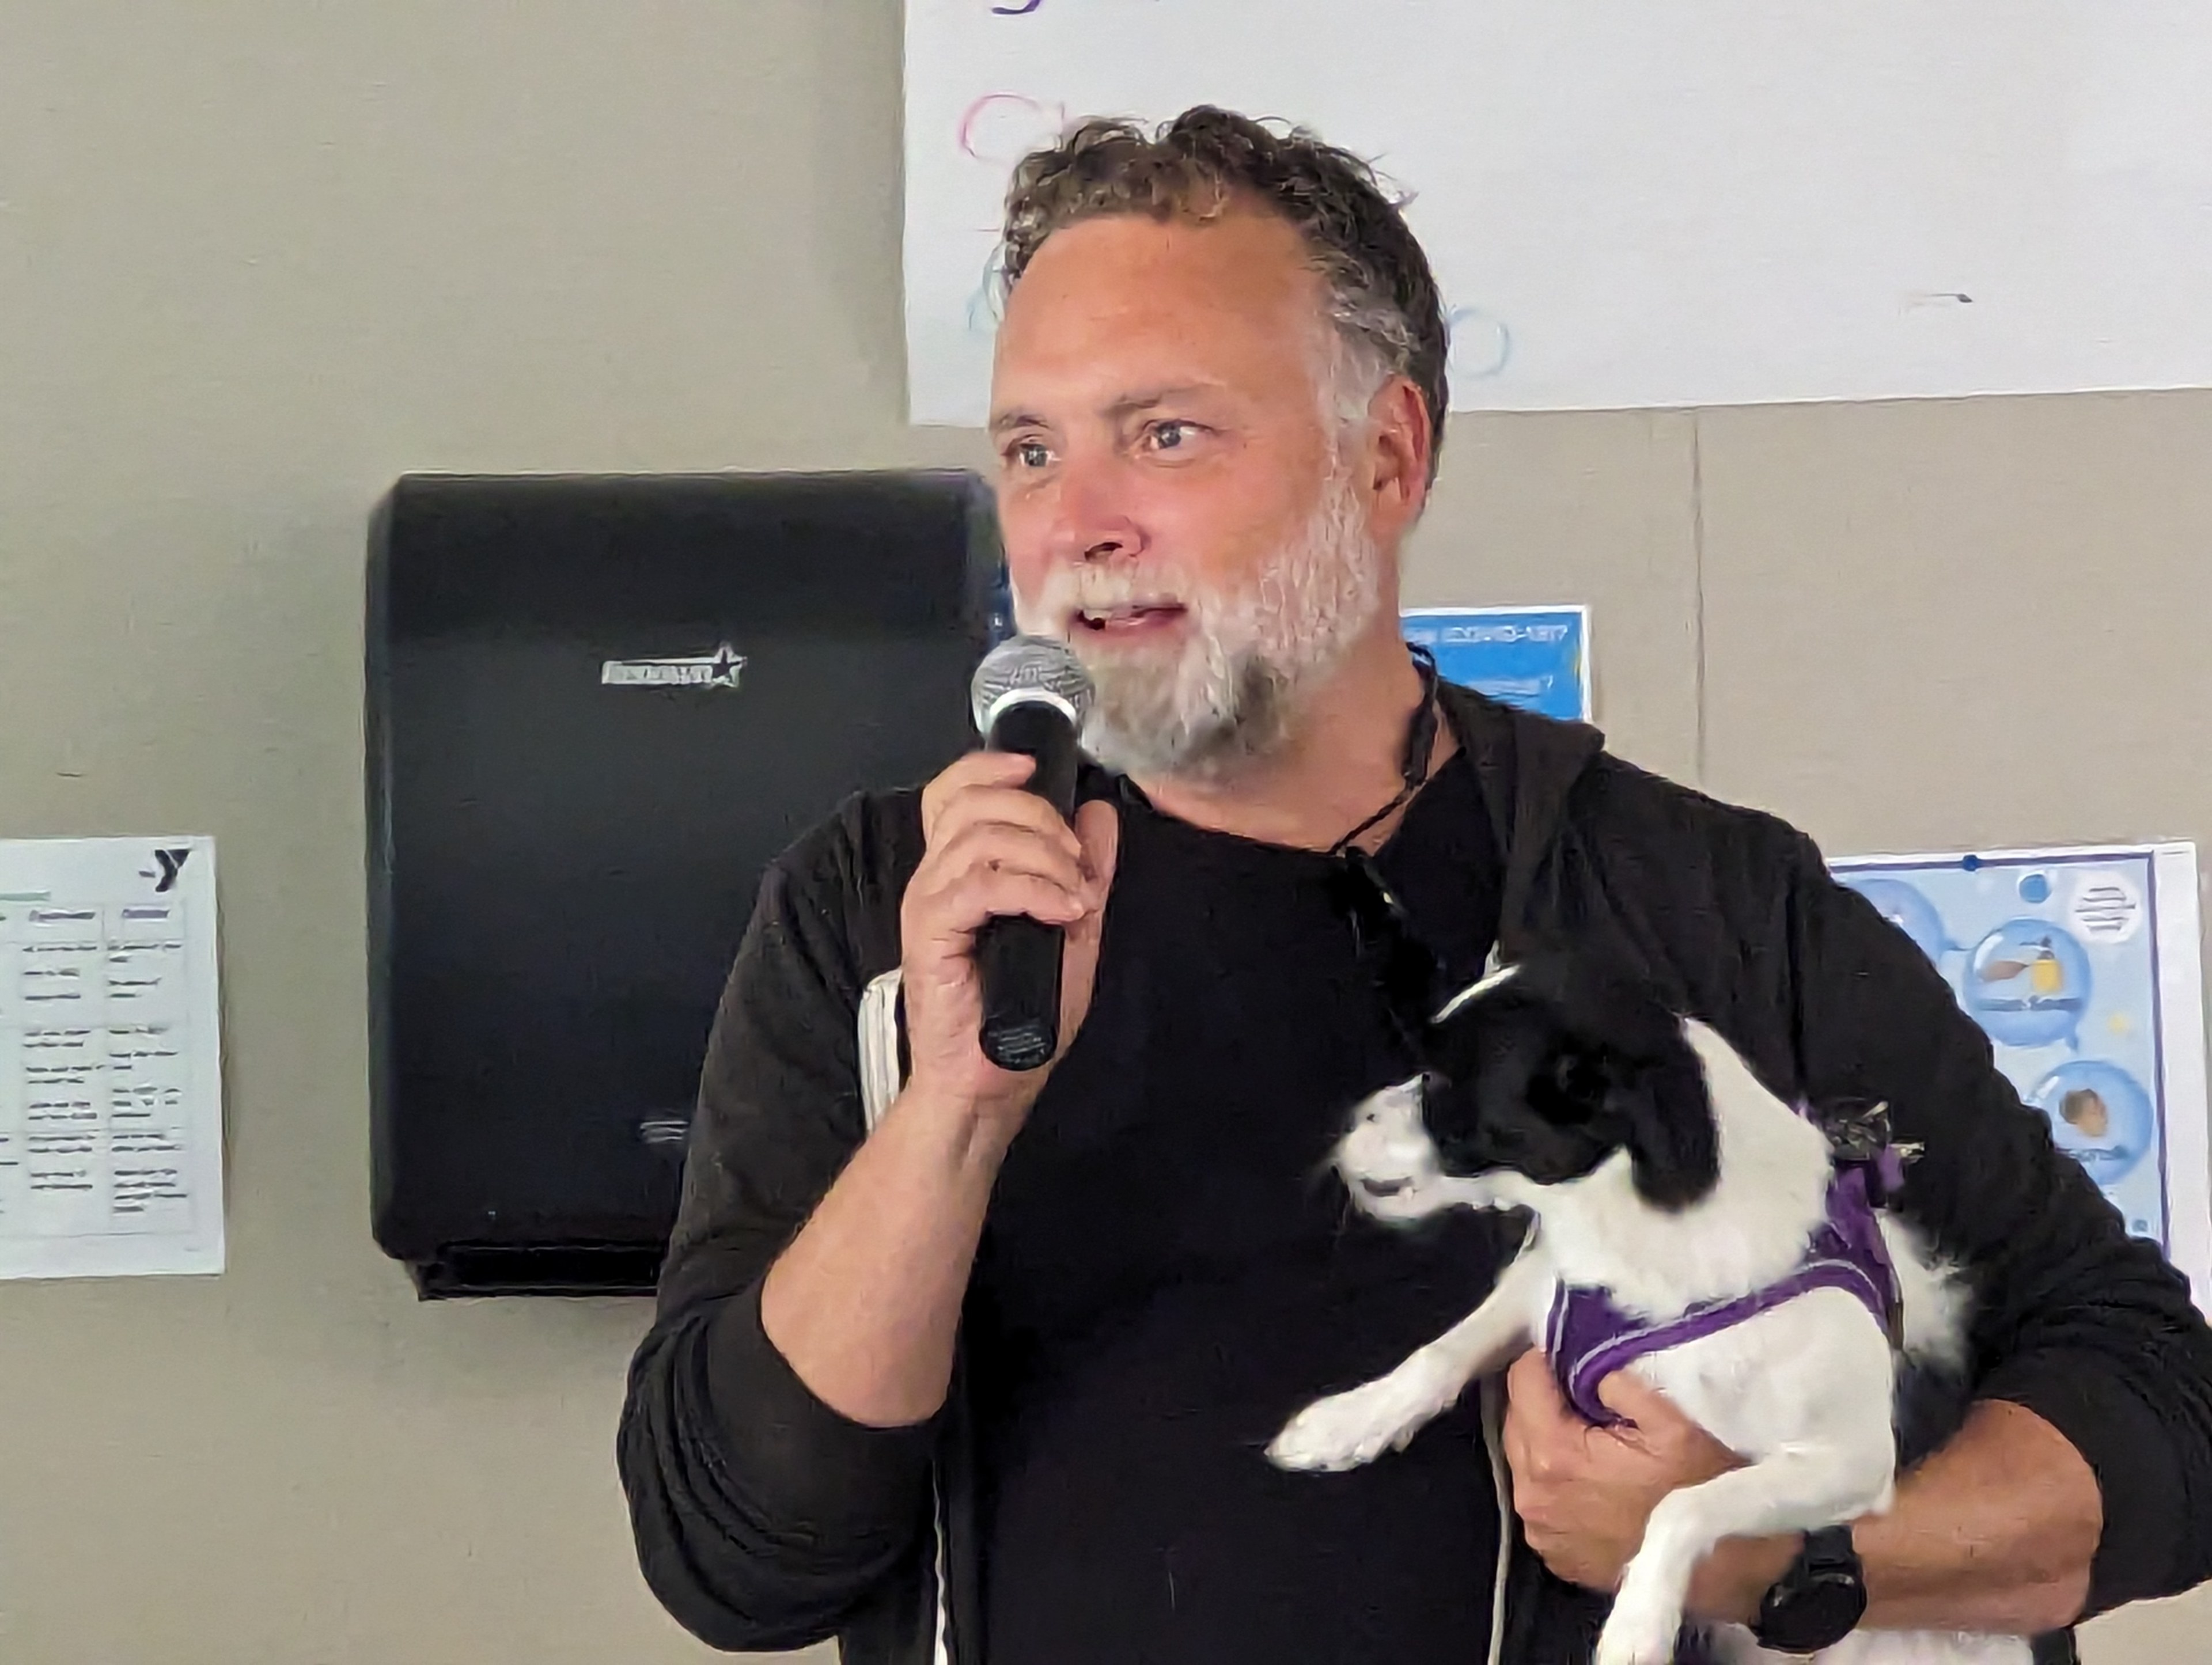 Eric Rozell, director of safe programs for the Tenderloin Community Benefit District, holds a dog named Lady under his arm as he addresses a community gathering at Boeddeker Park's clubhouse in the city's Tenderloin neighborhood Sunday.